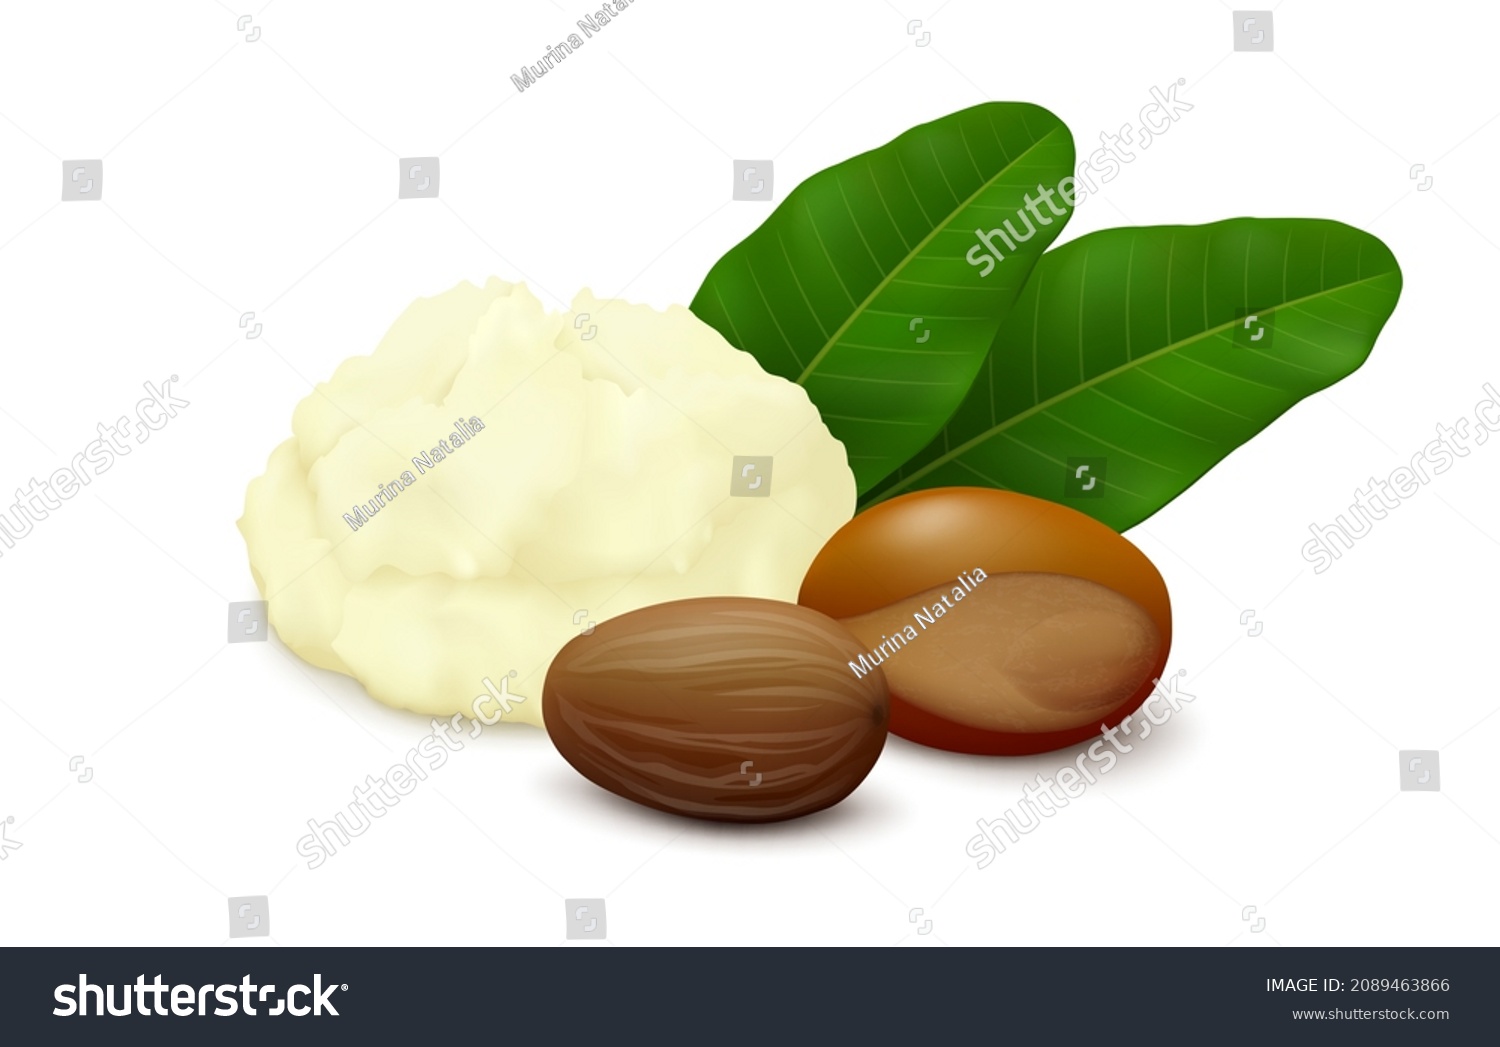 SVG of Shea (Vitellaria paradoxa) butter, two nuts (shelled, unshelled) and leaves isolated on white background. Side view. Realistic vector illustration. svg